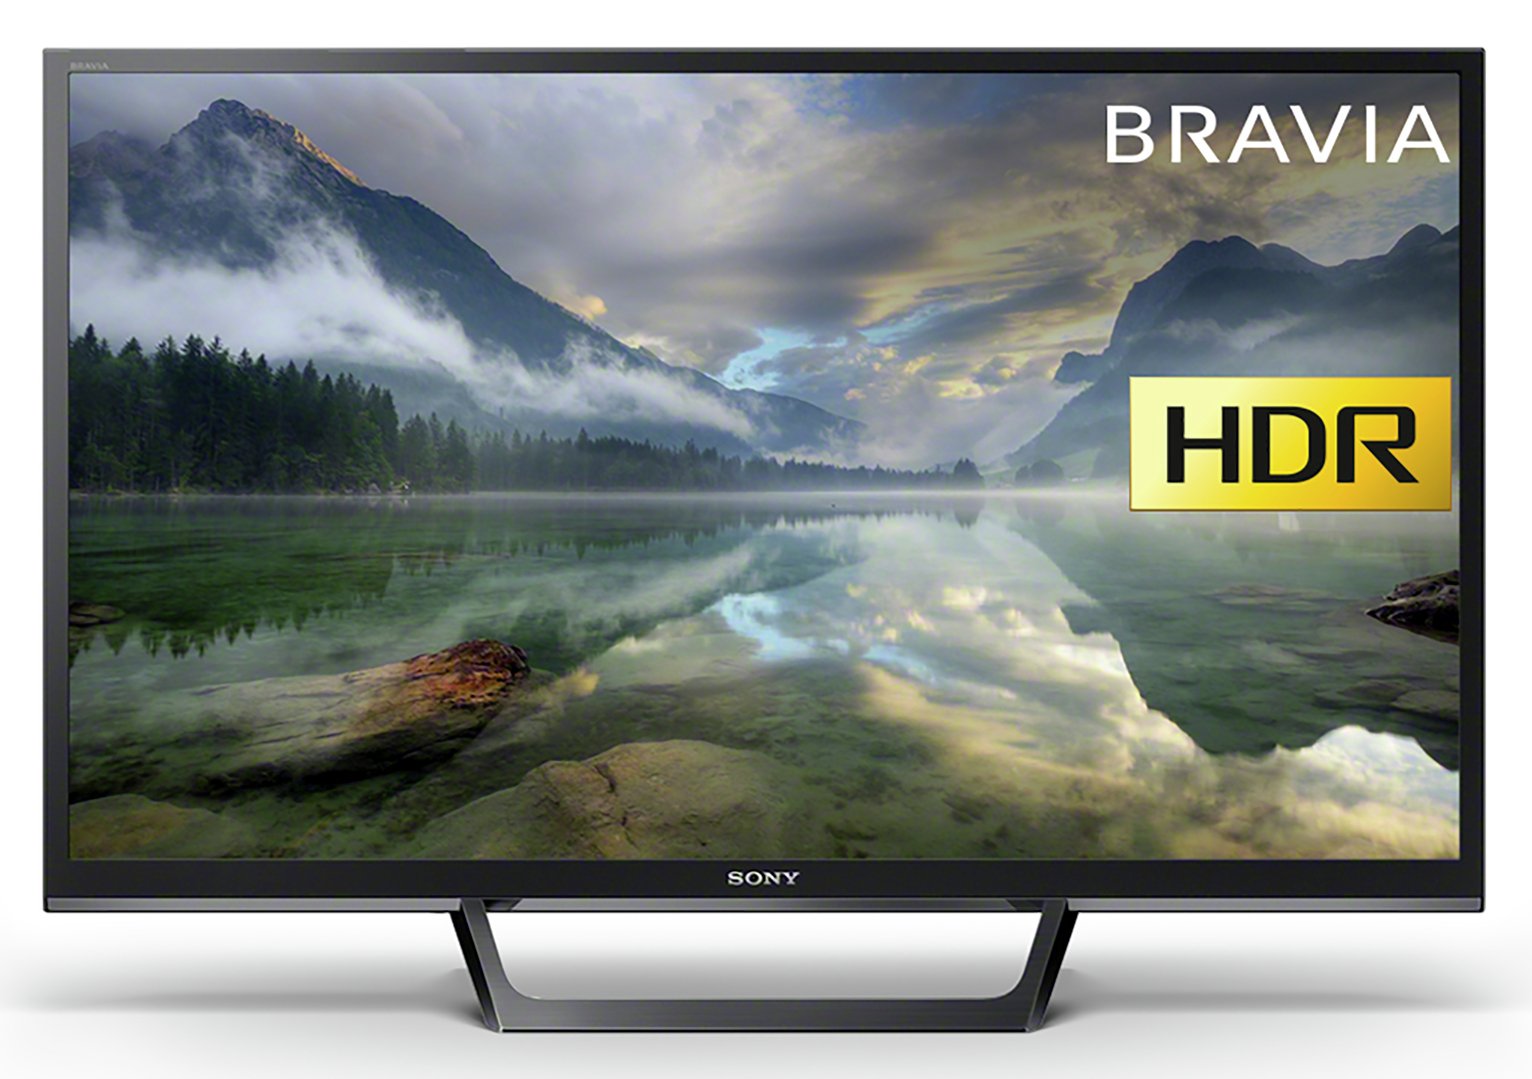 Sony 32 Inch KDL32WE613BU Smart HD Ready HDR LED TV Review